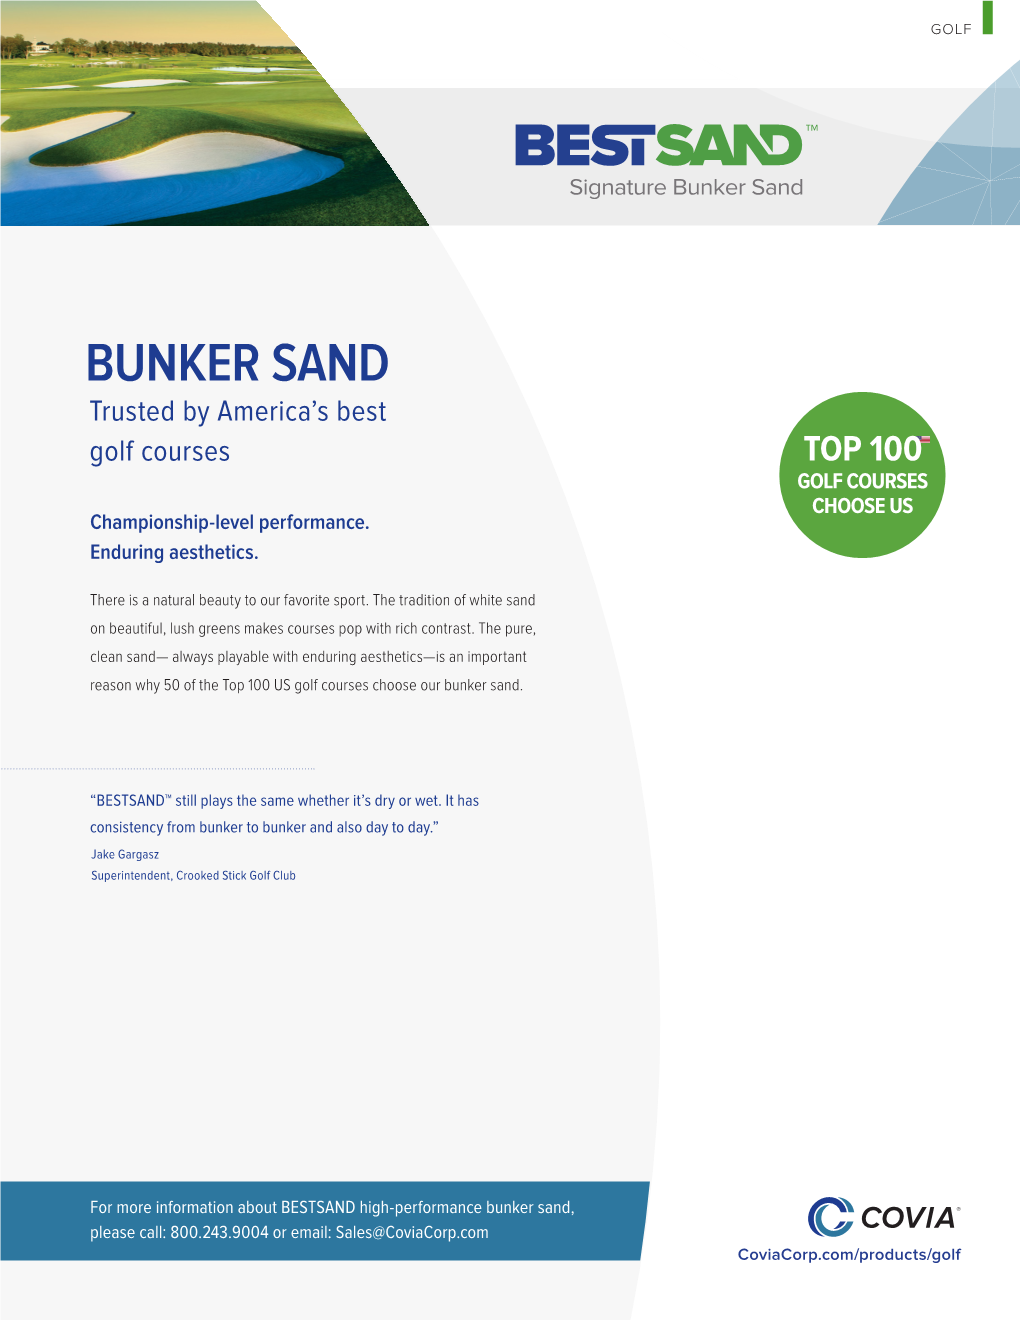 BUNKER SAND Trusted by America’S Best Golf Courses